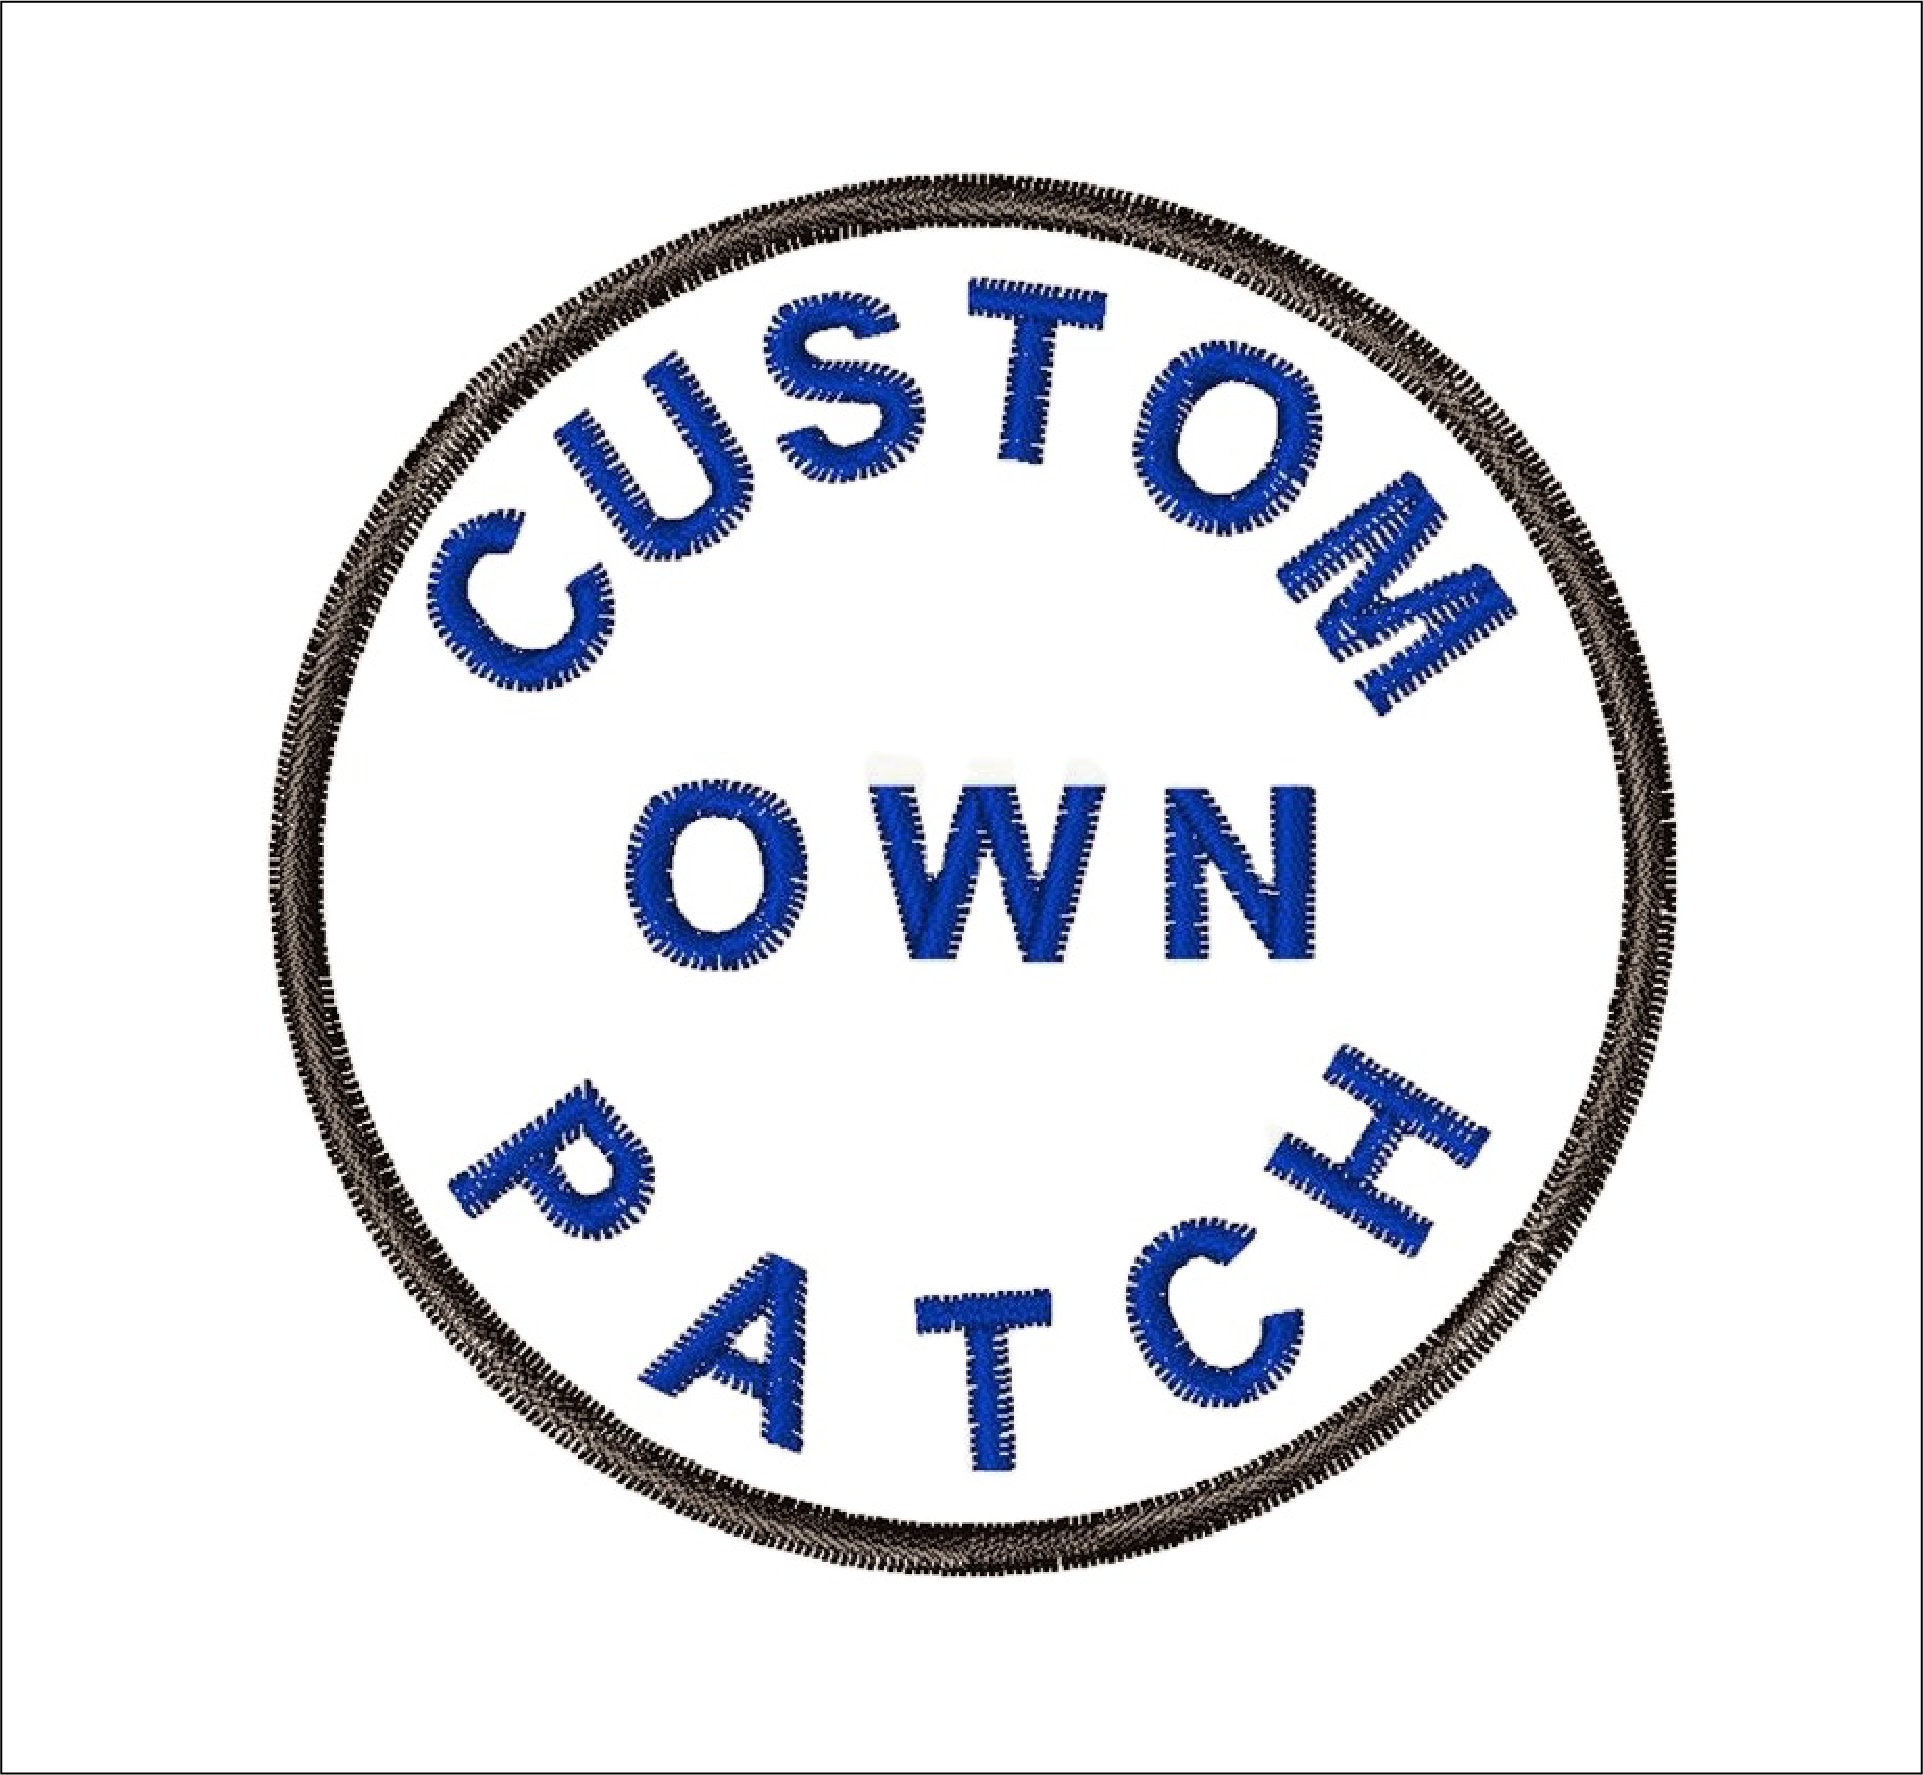 Custom Patches 3 Round, Custom Patch, Personalized Patch, Personalized  Patches, Iron on Patch, Logo Patch, Company Patches, Printed Patch 